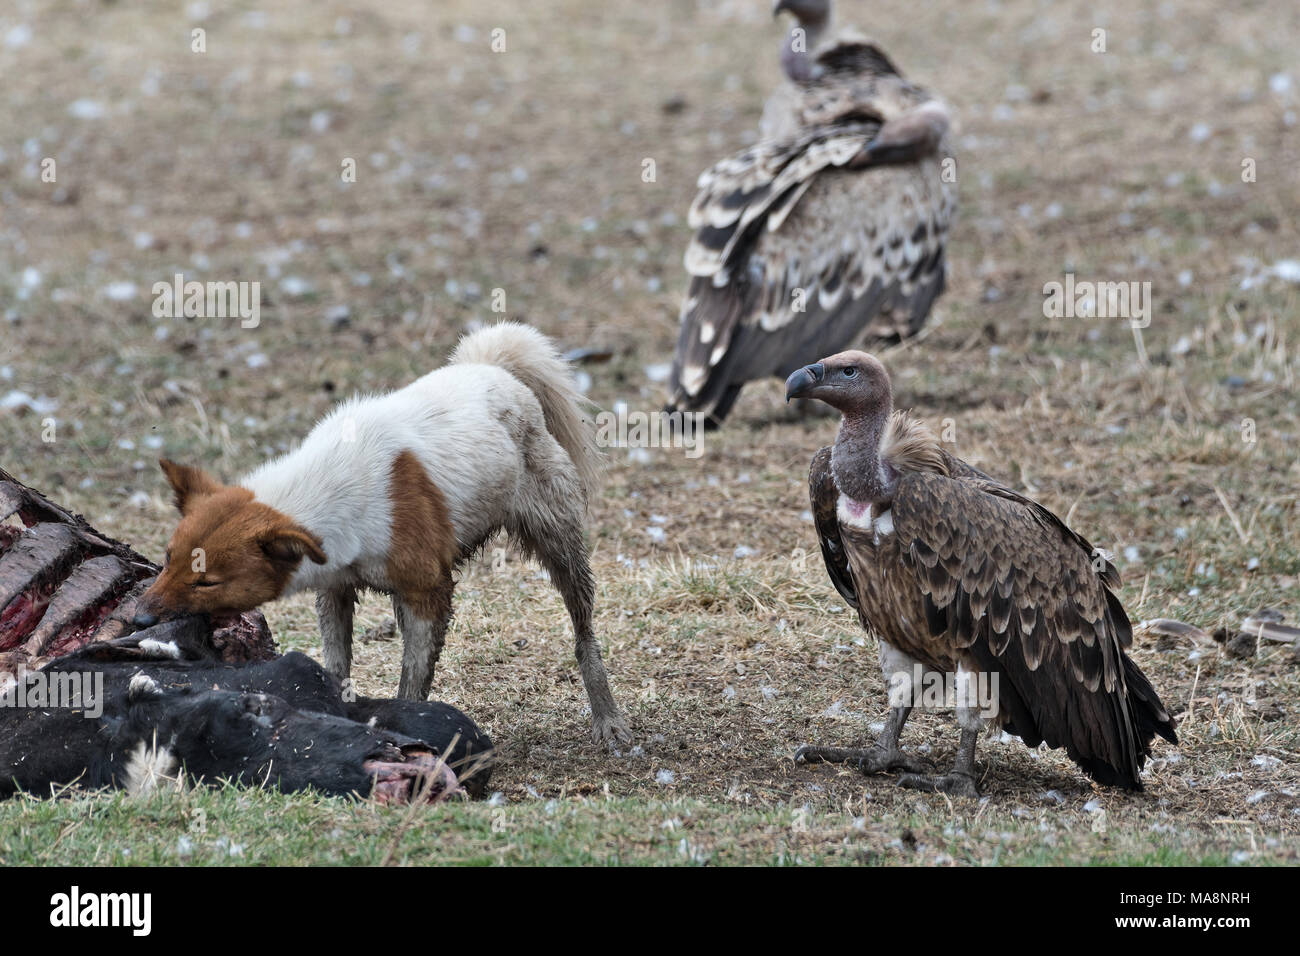 Stray dog and vultures on the carcass of a cow, Ethiopia Stock Photo